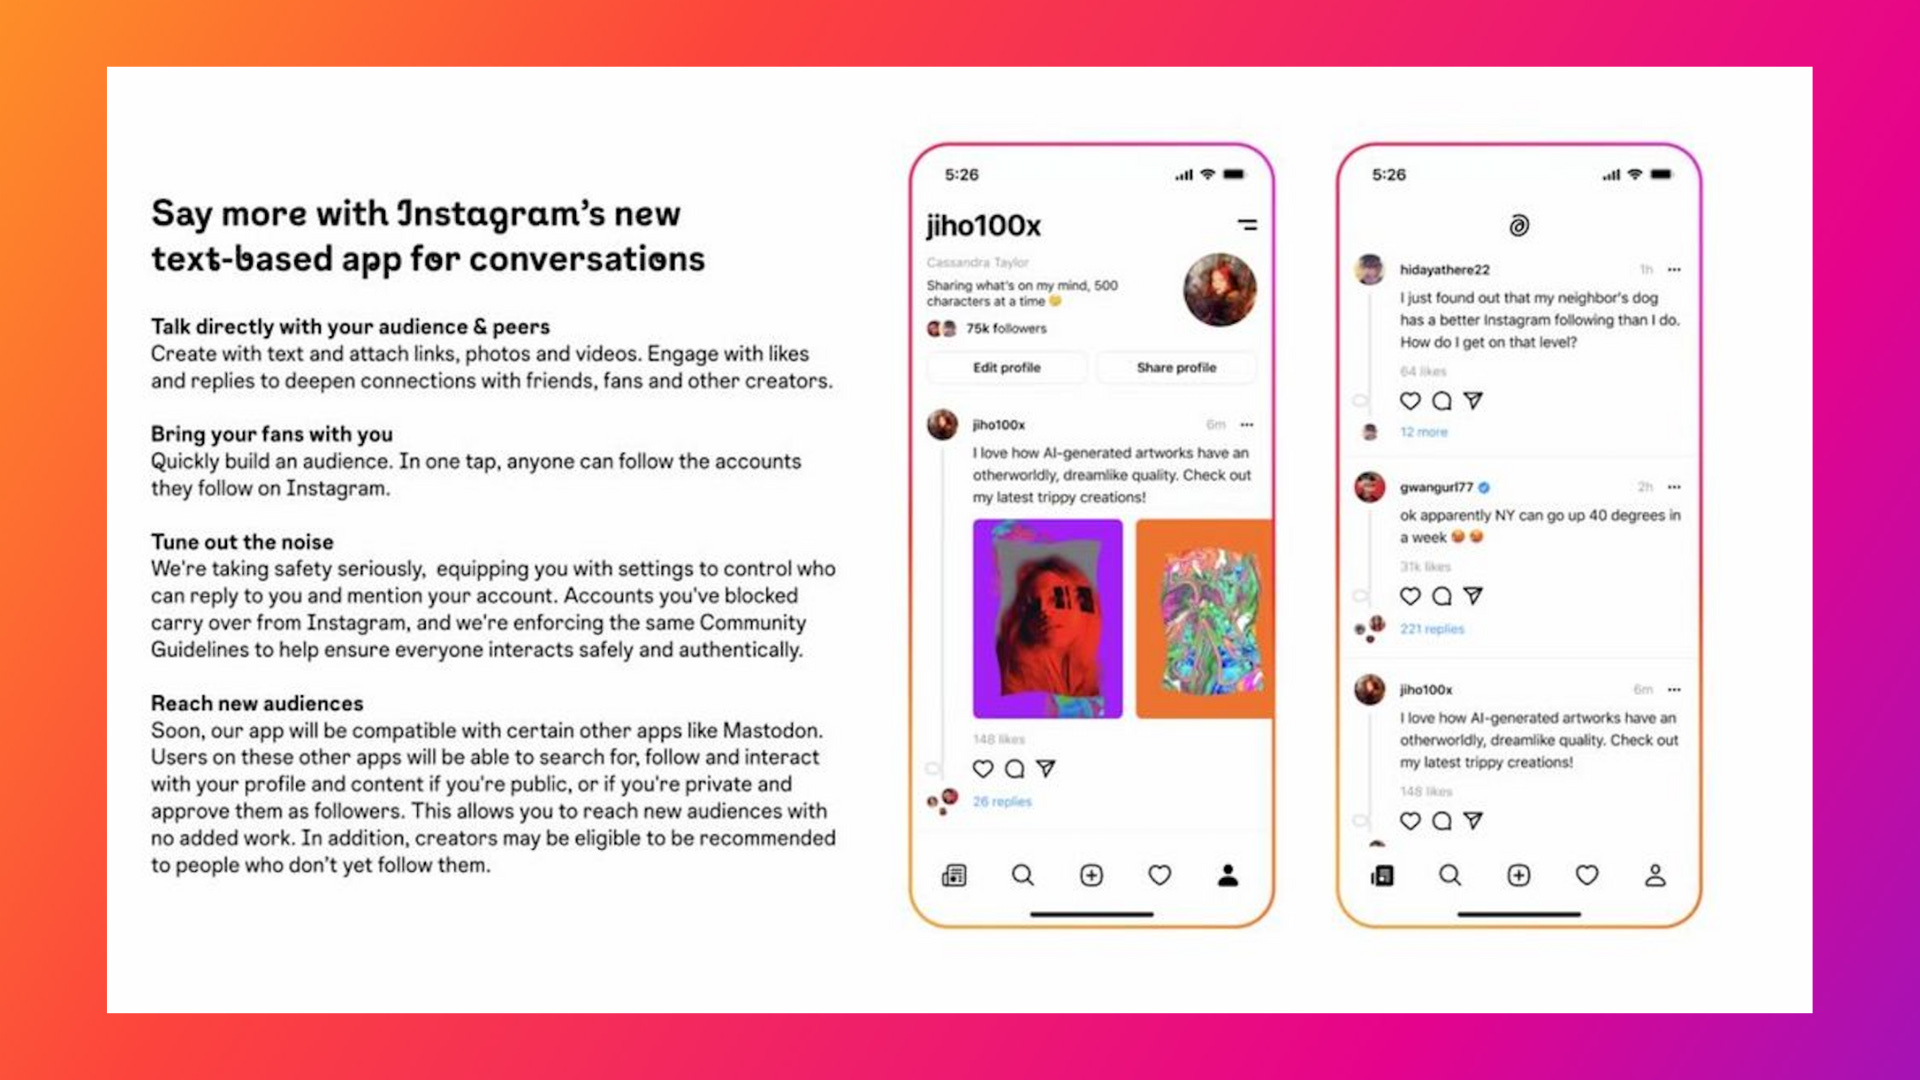 screenshot of Instagram's new text-based app and information they've been sharing with creators - on the left if a description titled "say more with Instagram's new text-based app for conversations" - on the right are 2 mobile screens with a look at the text and photo based updates in the app